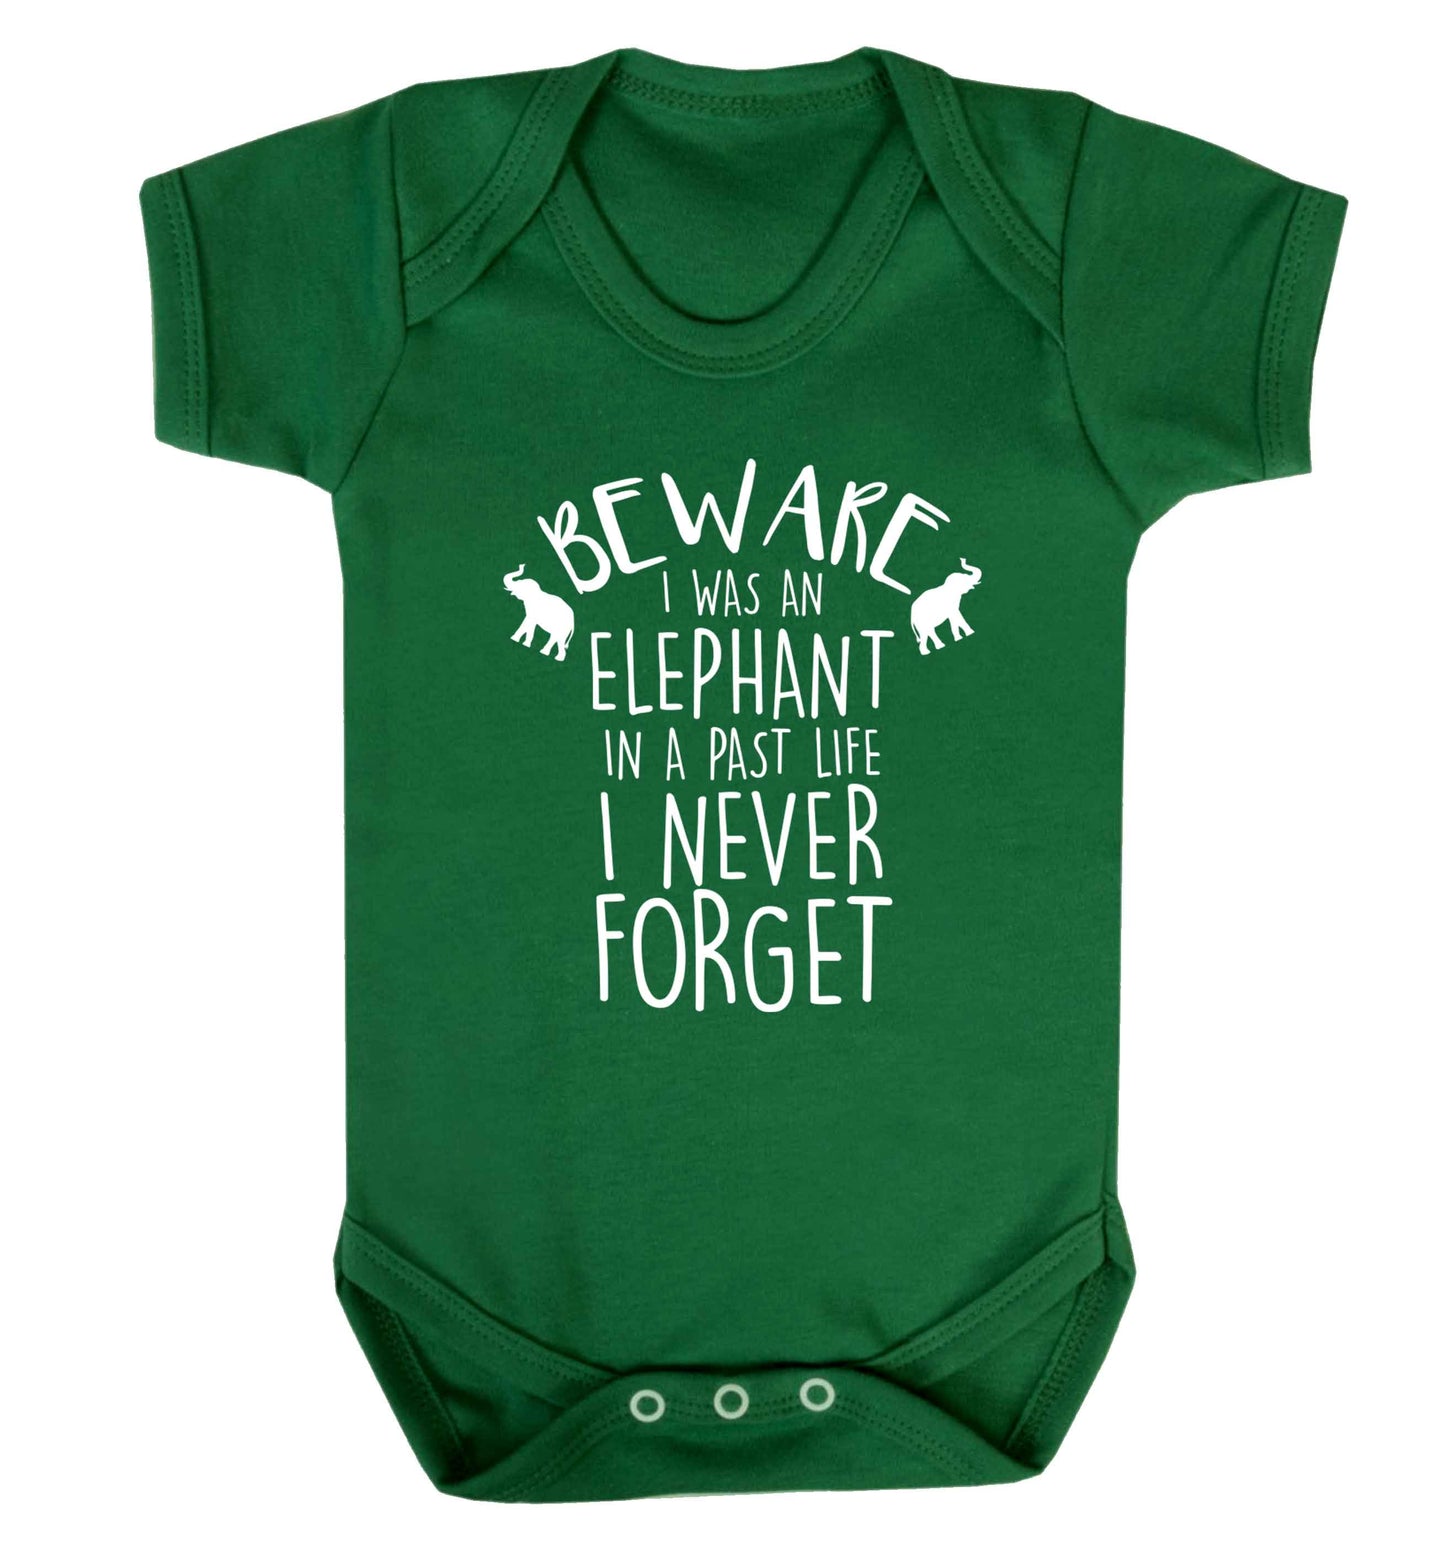 Beware I was an elephant in my past life I never forget Baby Vest green 18-24 months